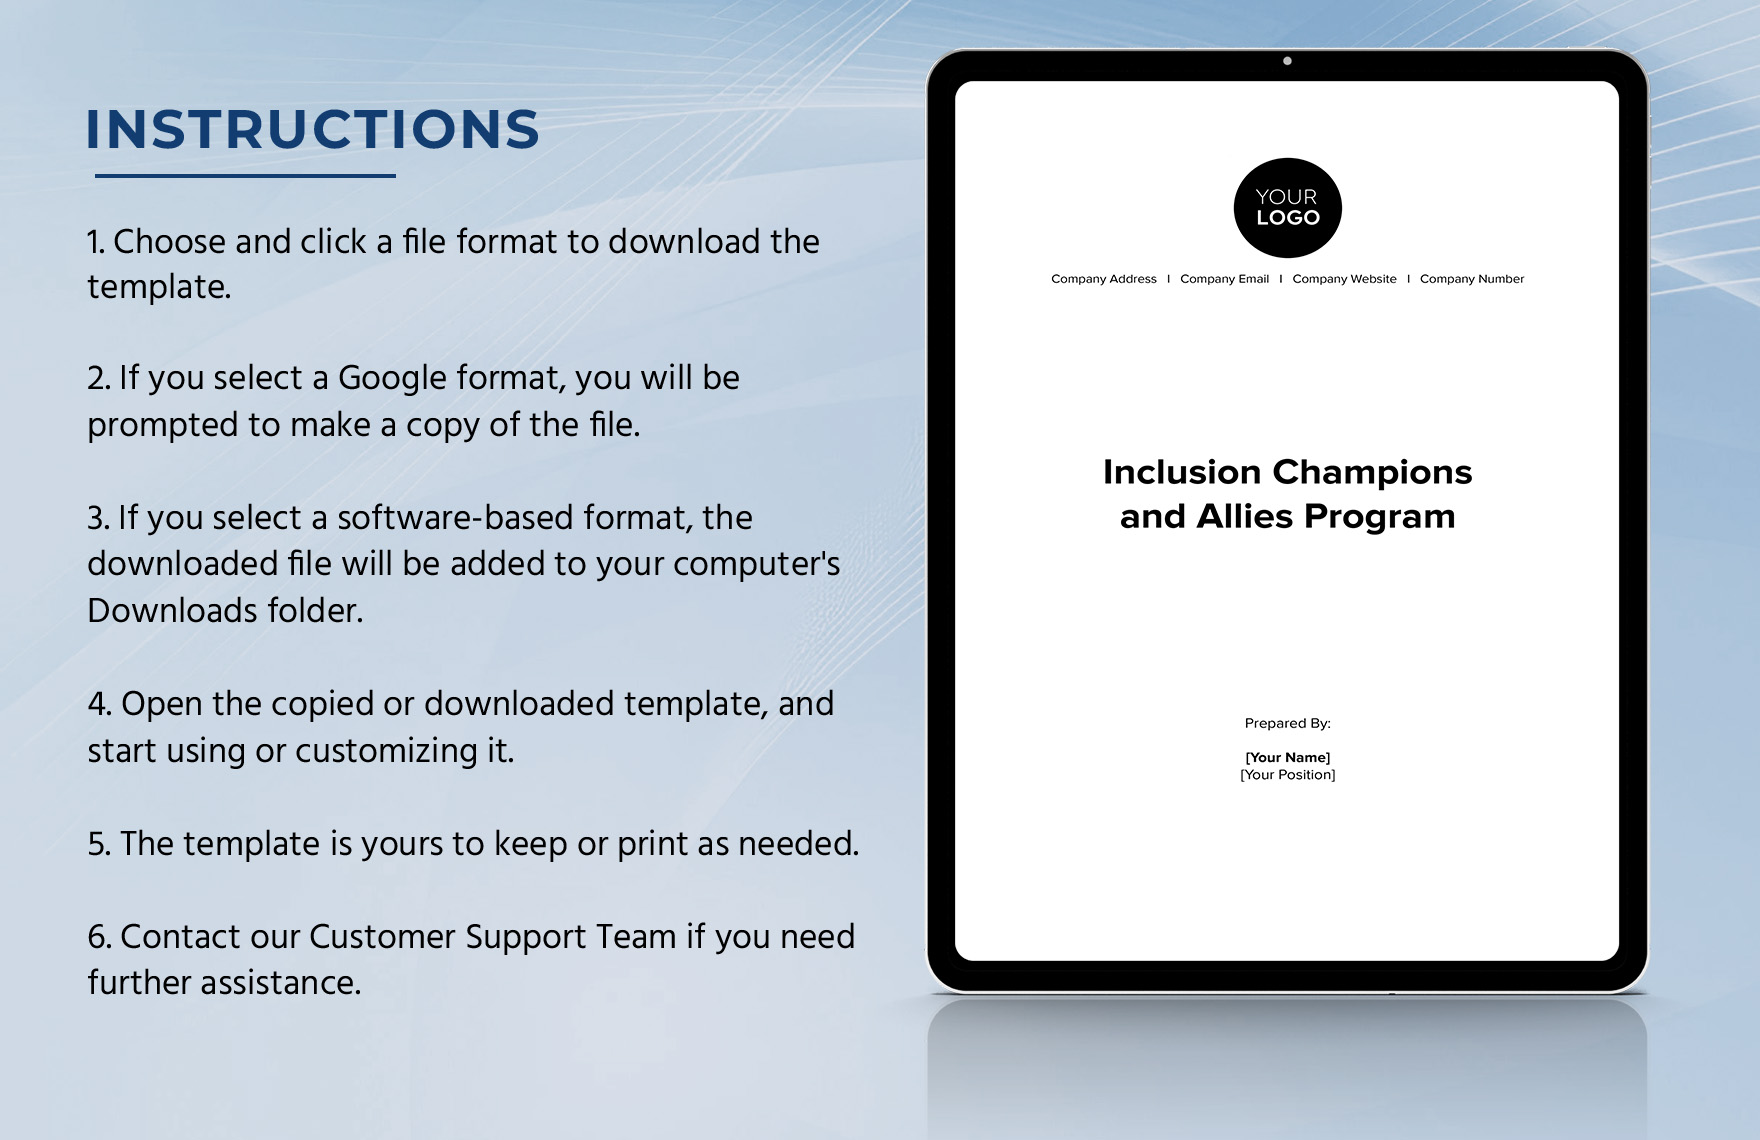 Inclusion Champions and Allies Program HR Template